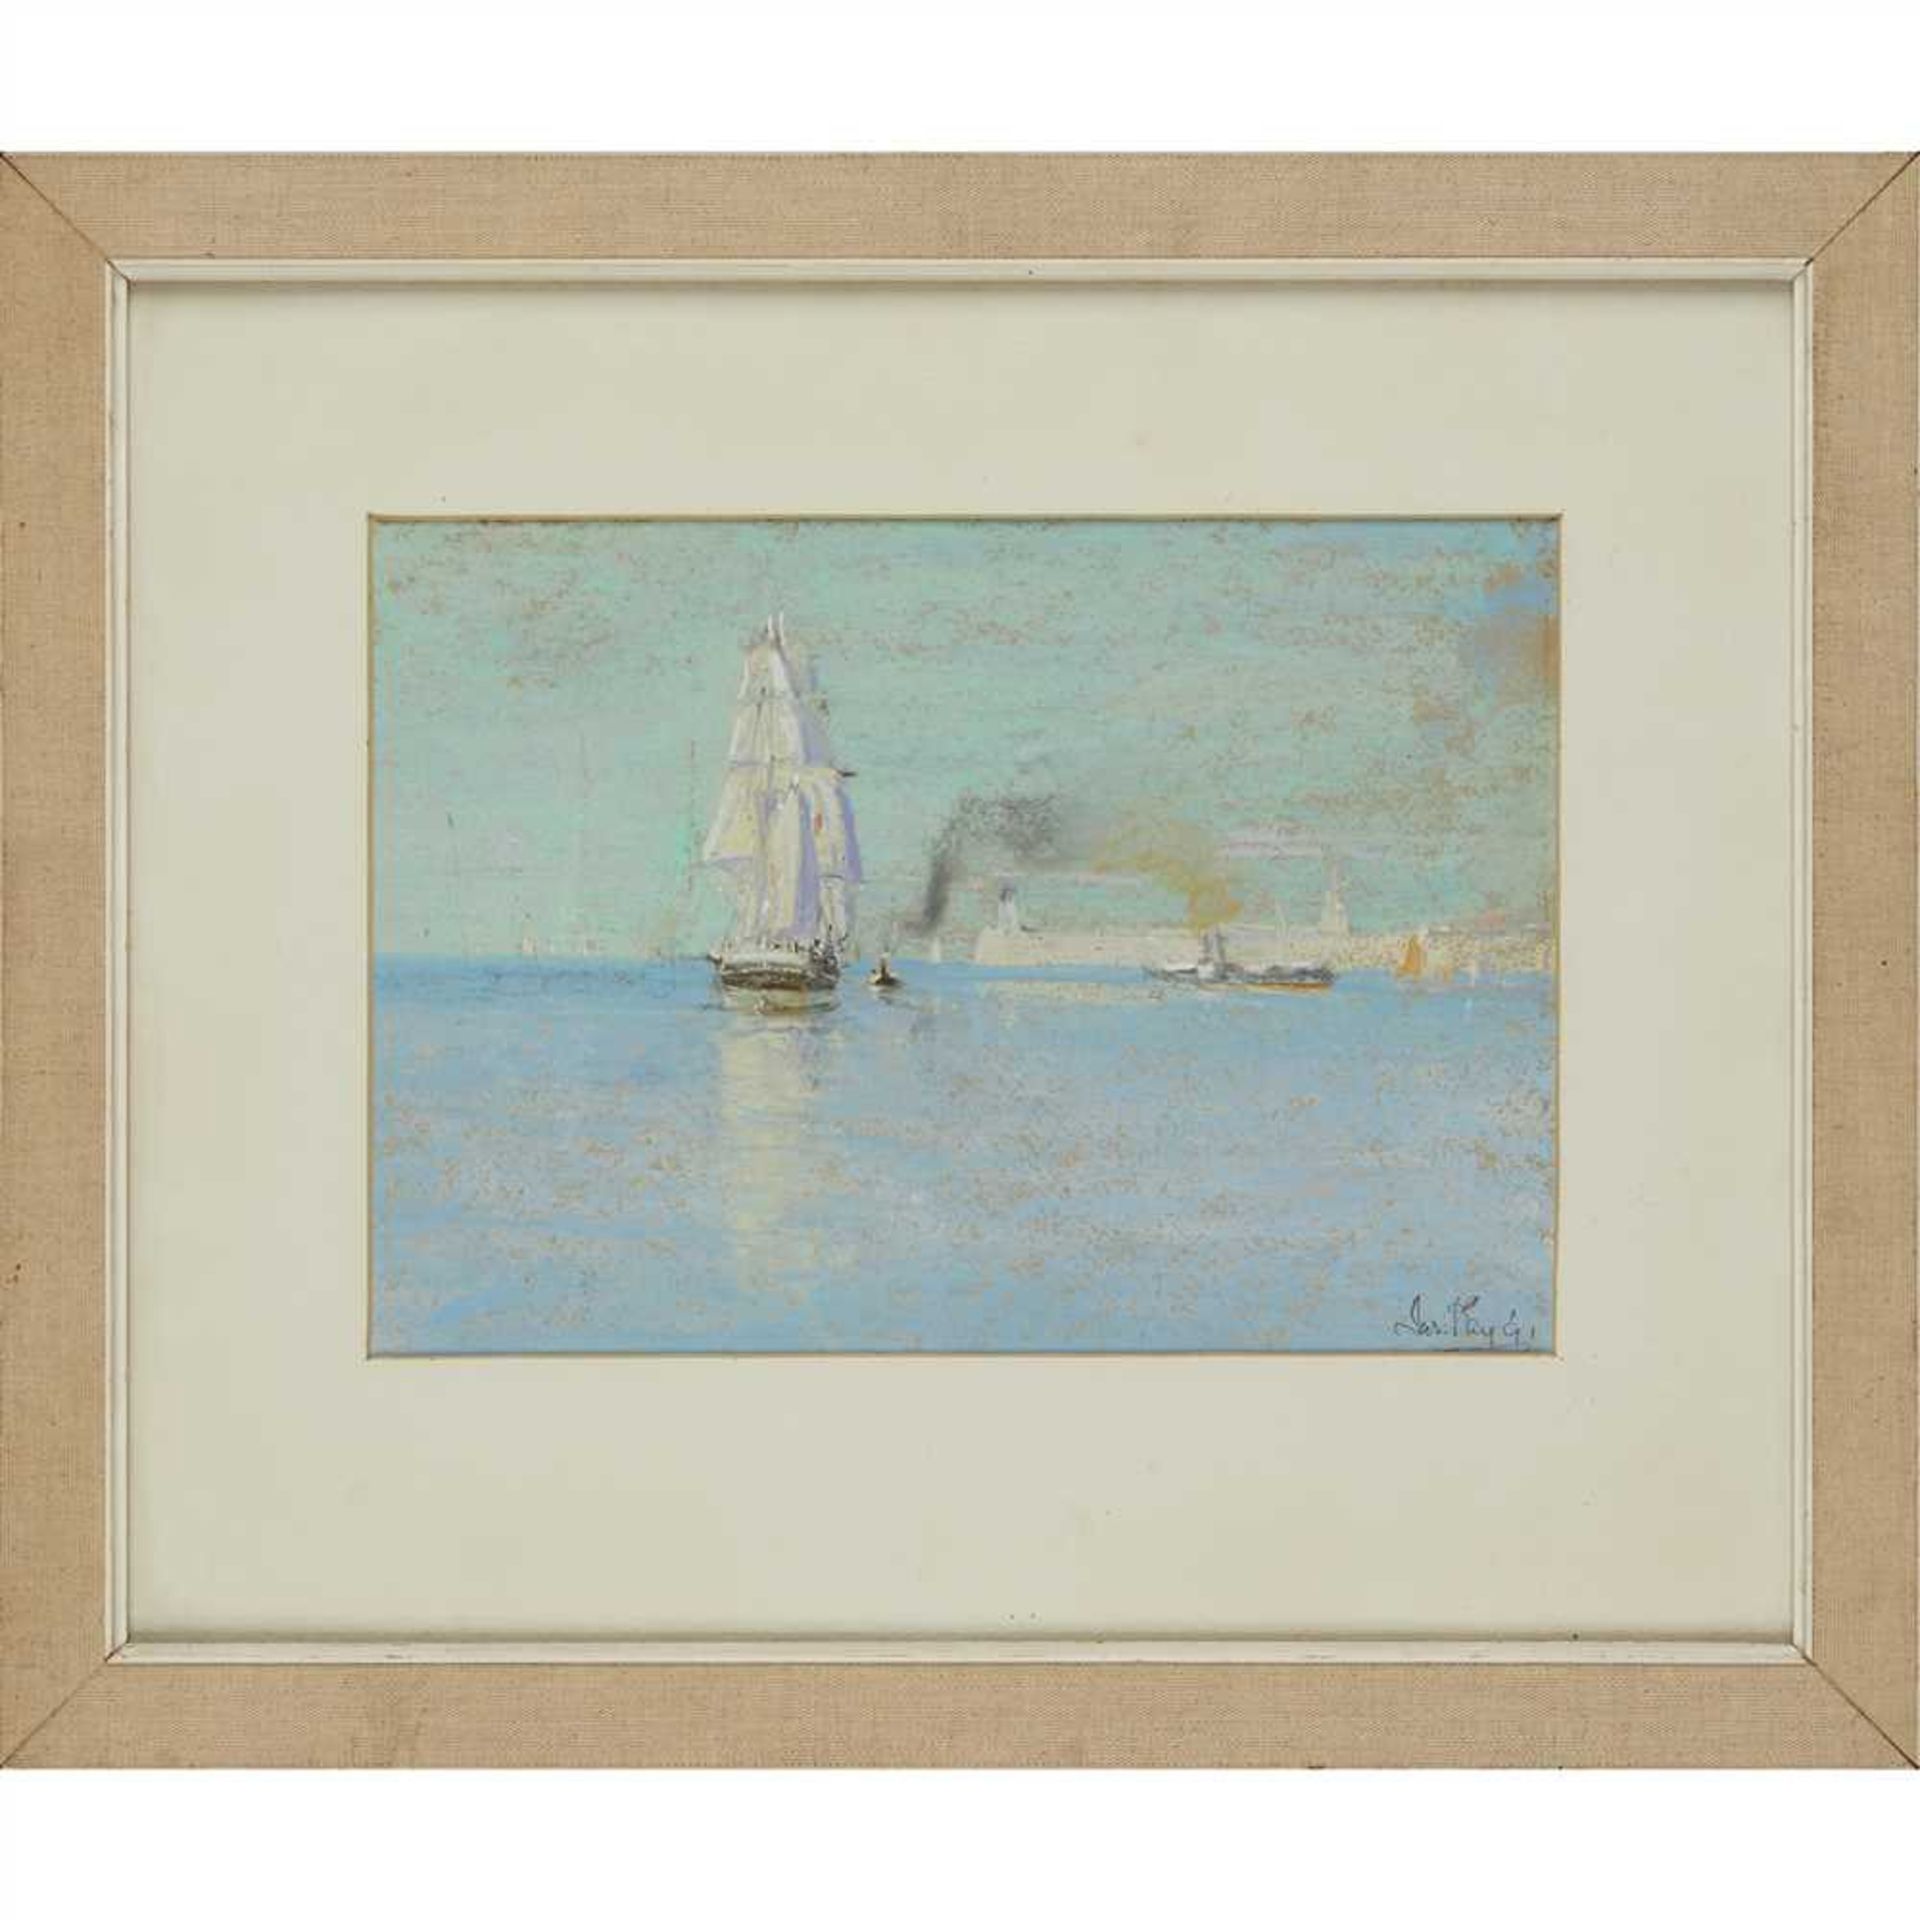 JAMES KAY R.S.A., R.S.W. (SCOTTISH 1858-1942) TALL SHIP IN HARBOUR Signed and dated '91, pastel ( - Image 3 of 4